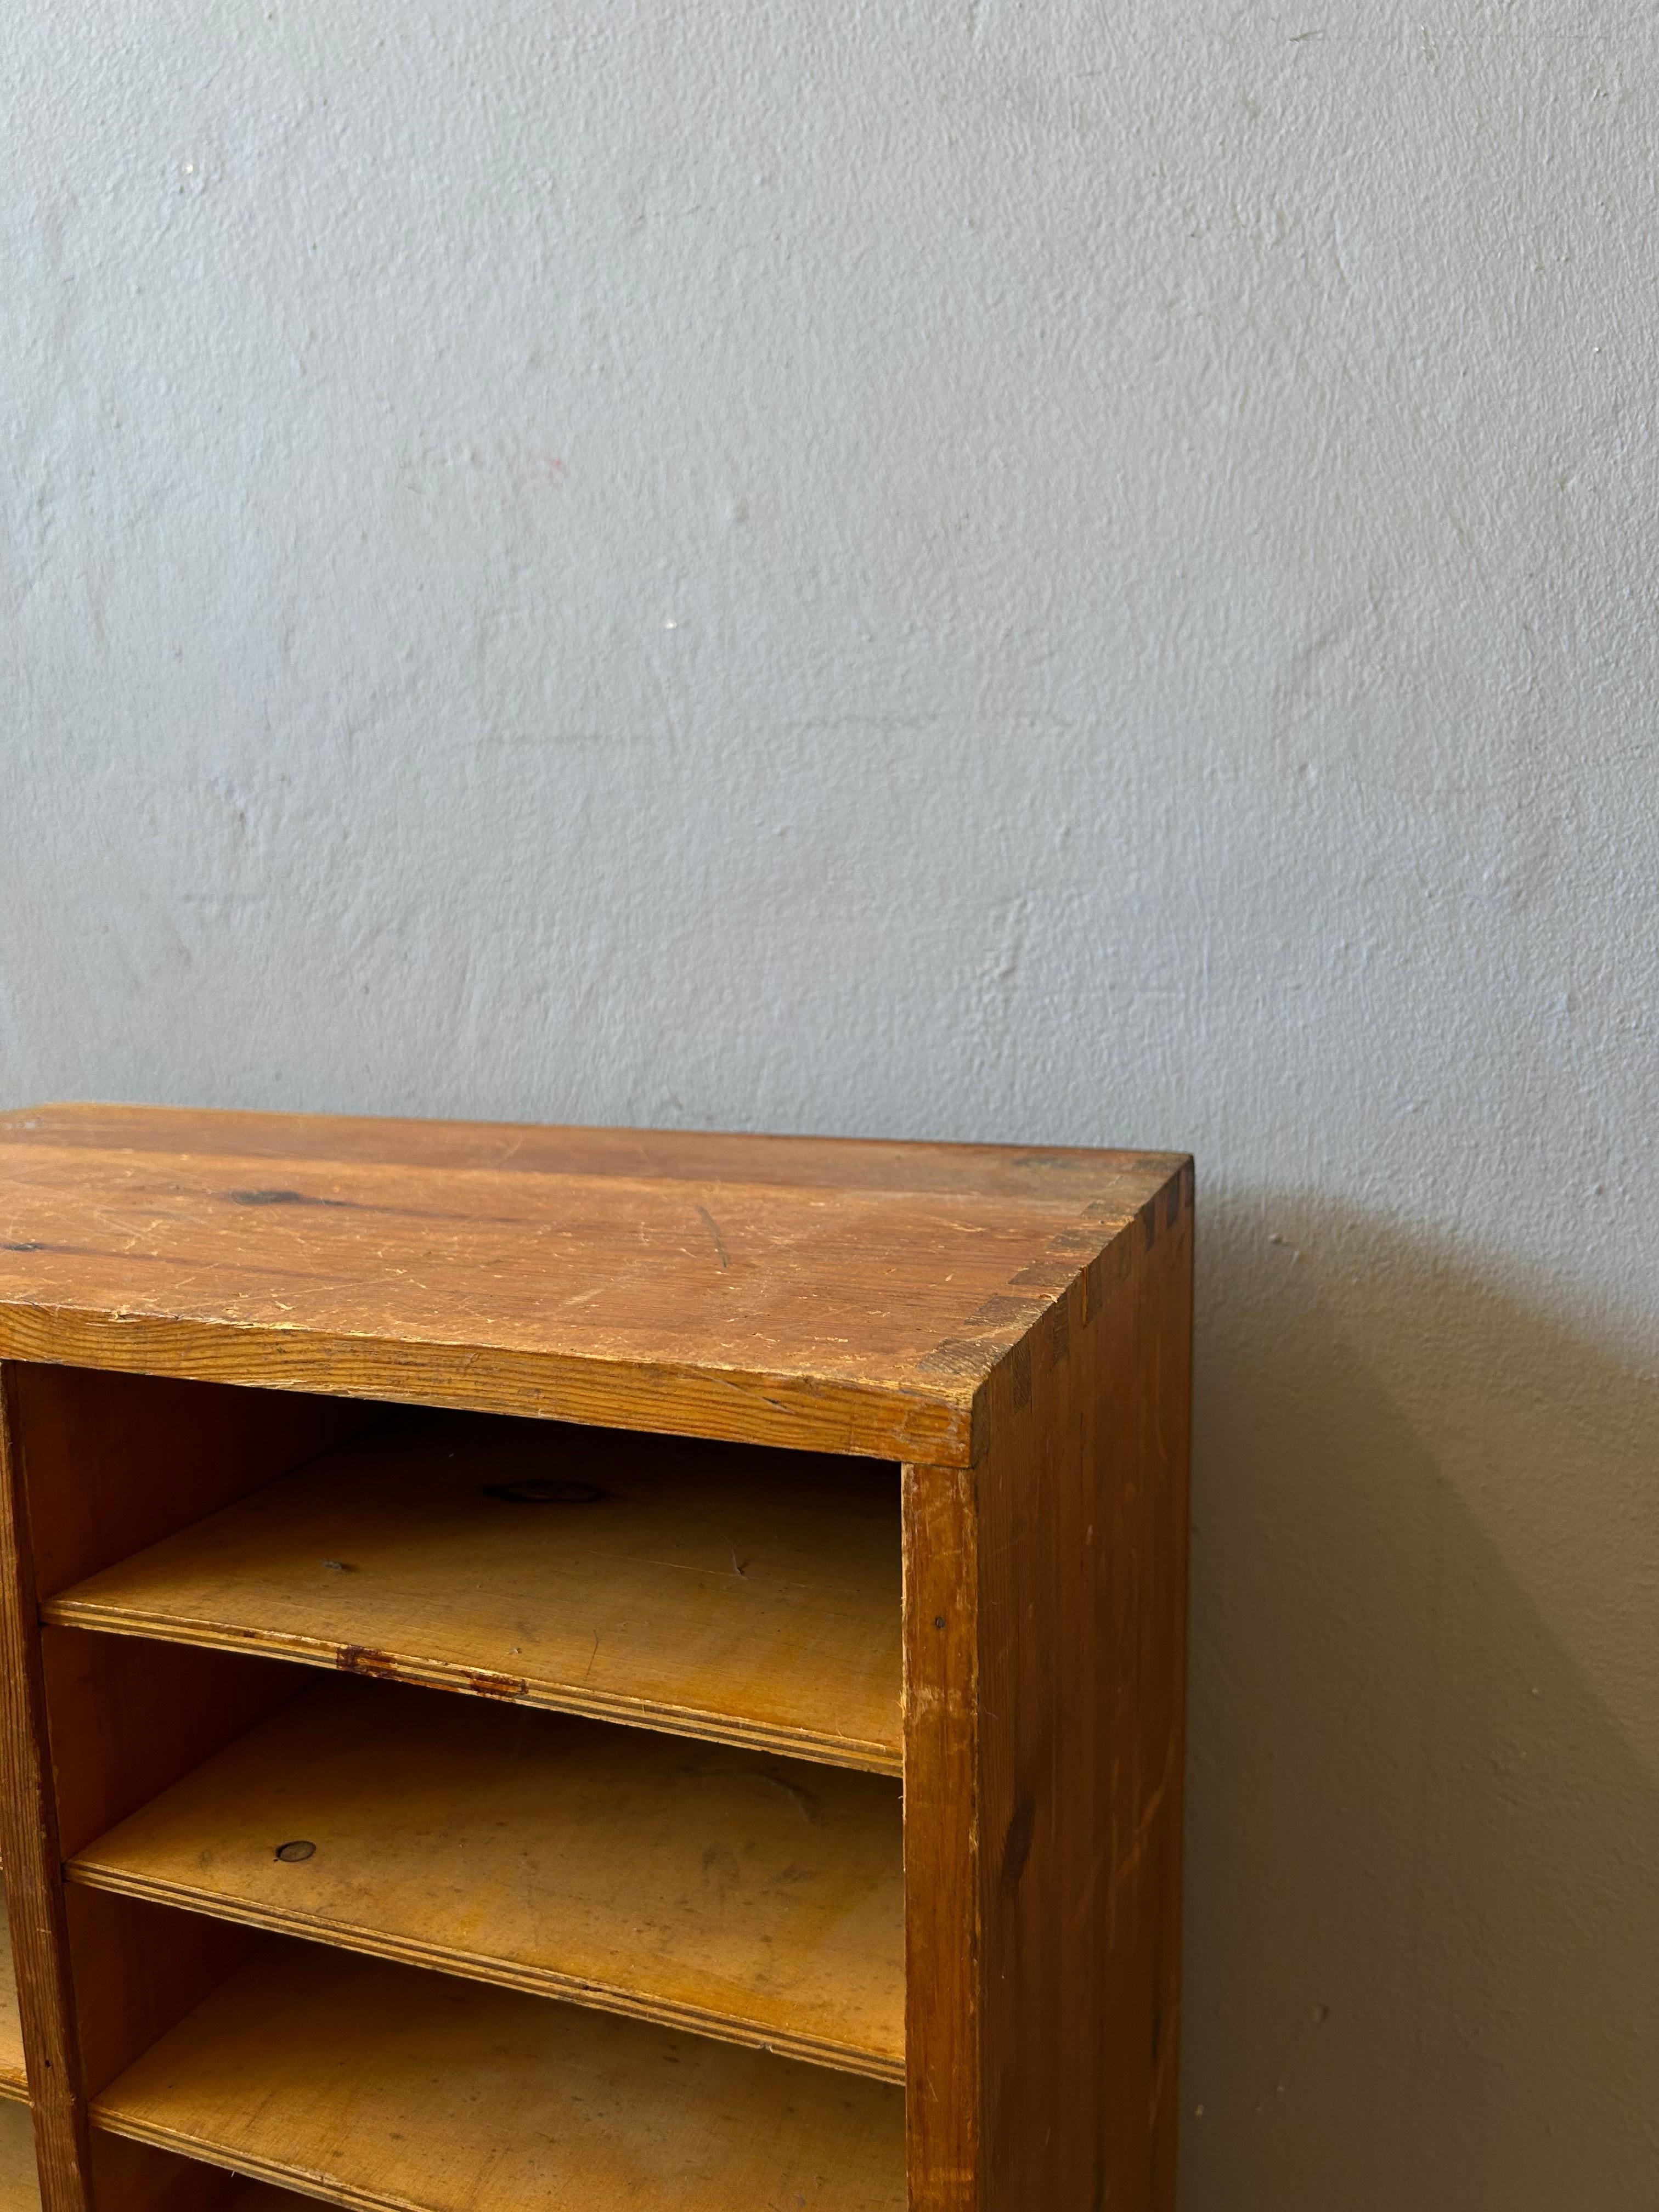 Rare Danish solid pine filing shelf made for the danish postal service in the 1940s.

This filing shelf was made by a talented danish craftsman in the 1940s and its edges are tapered together with beautiful solid visible joints.

This piece was